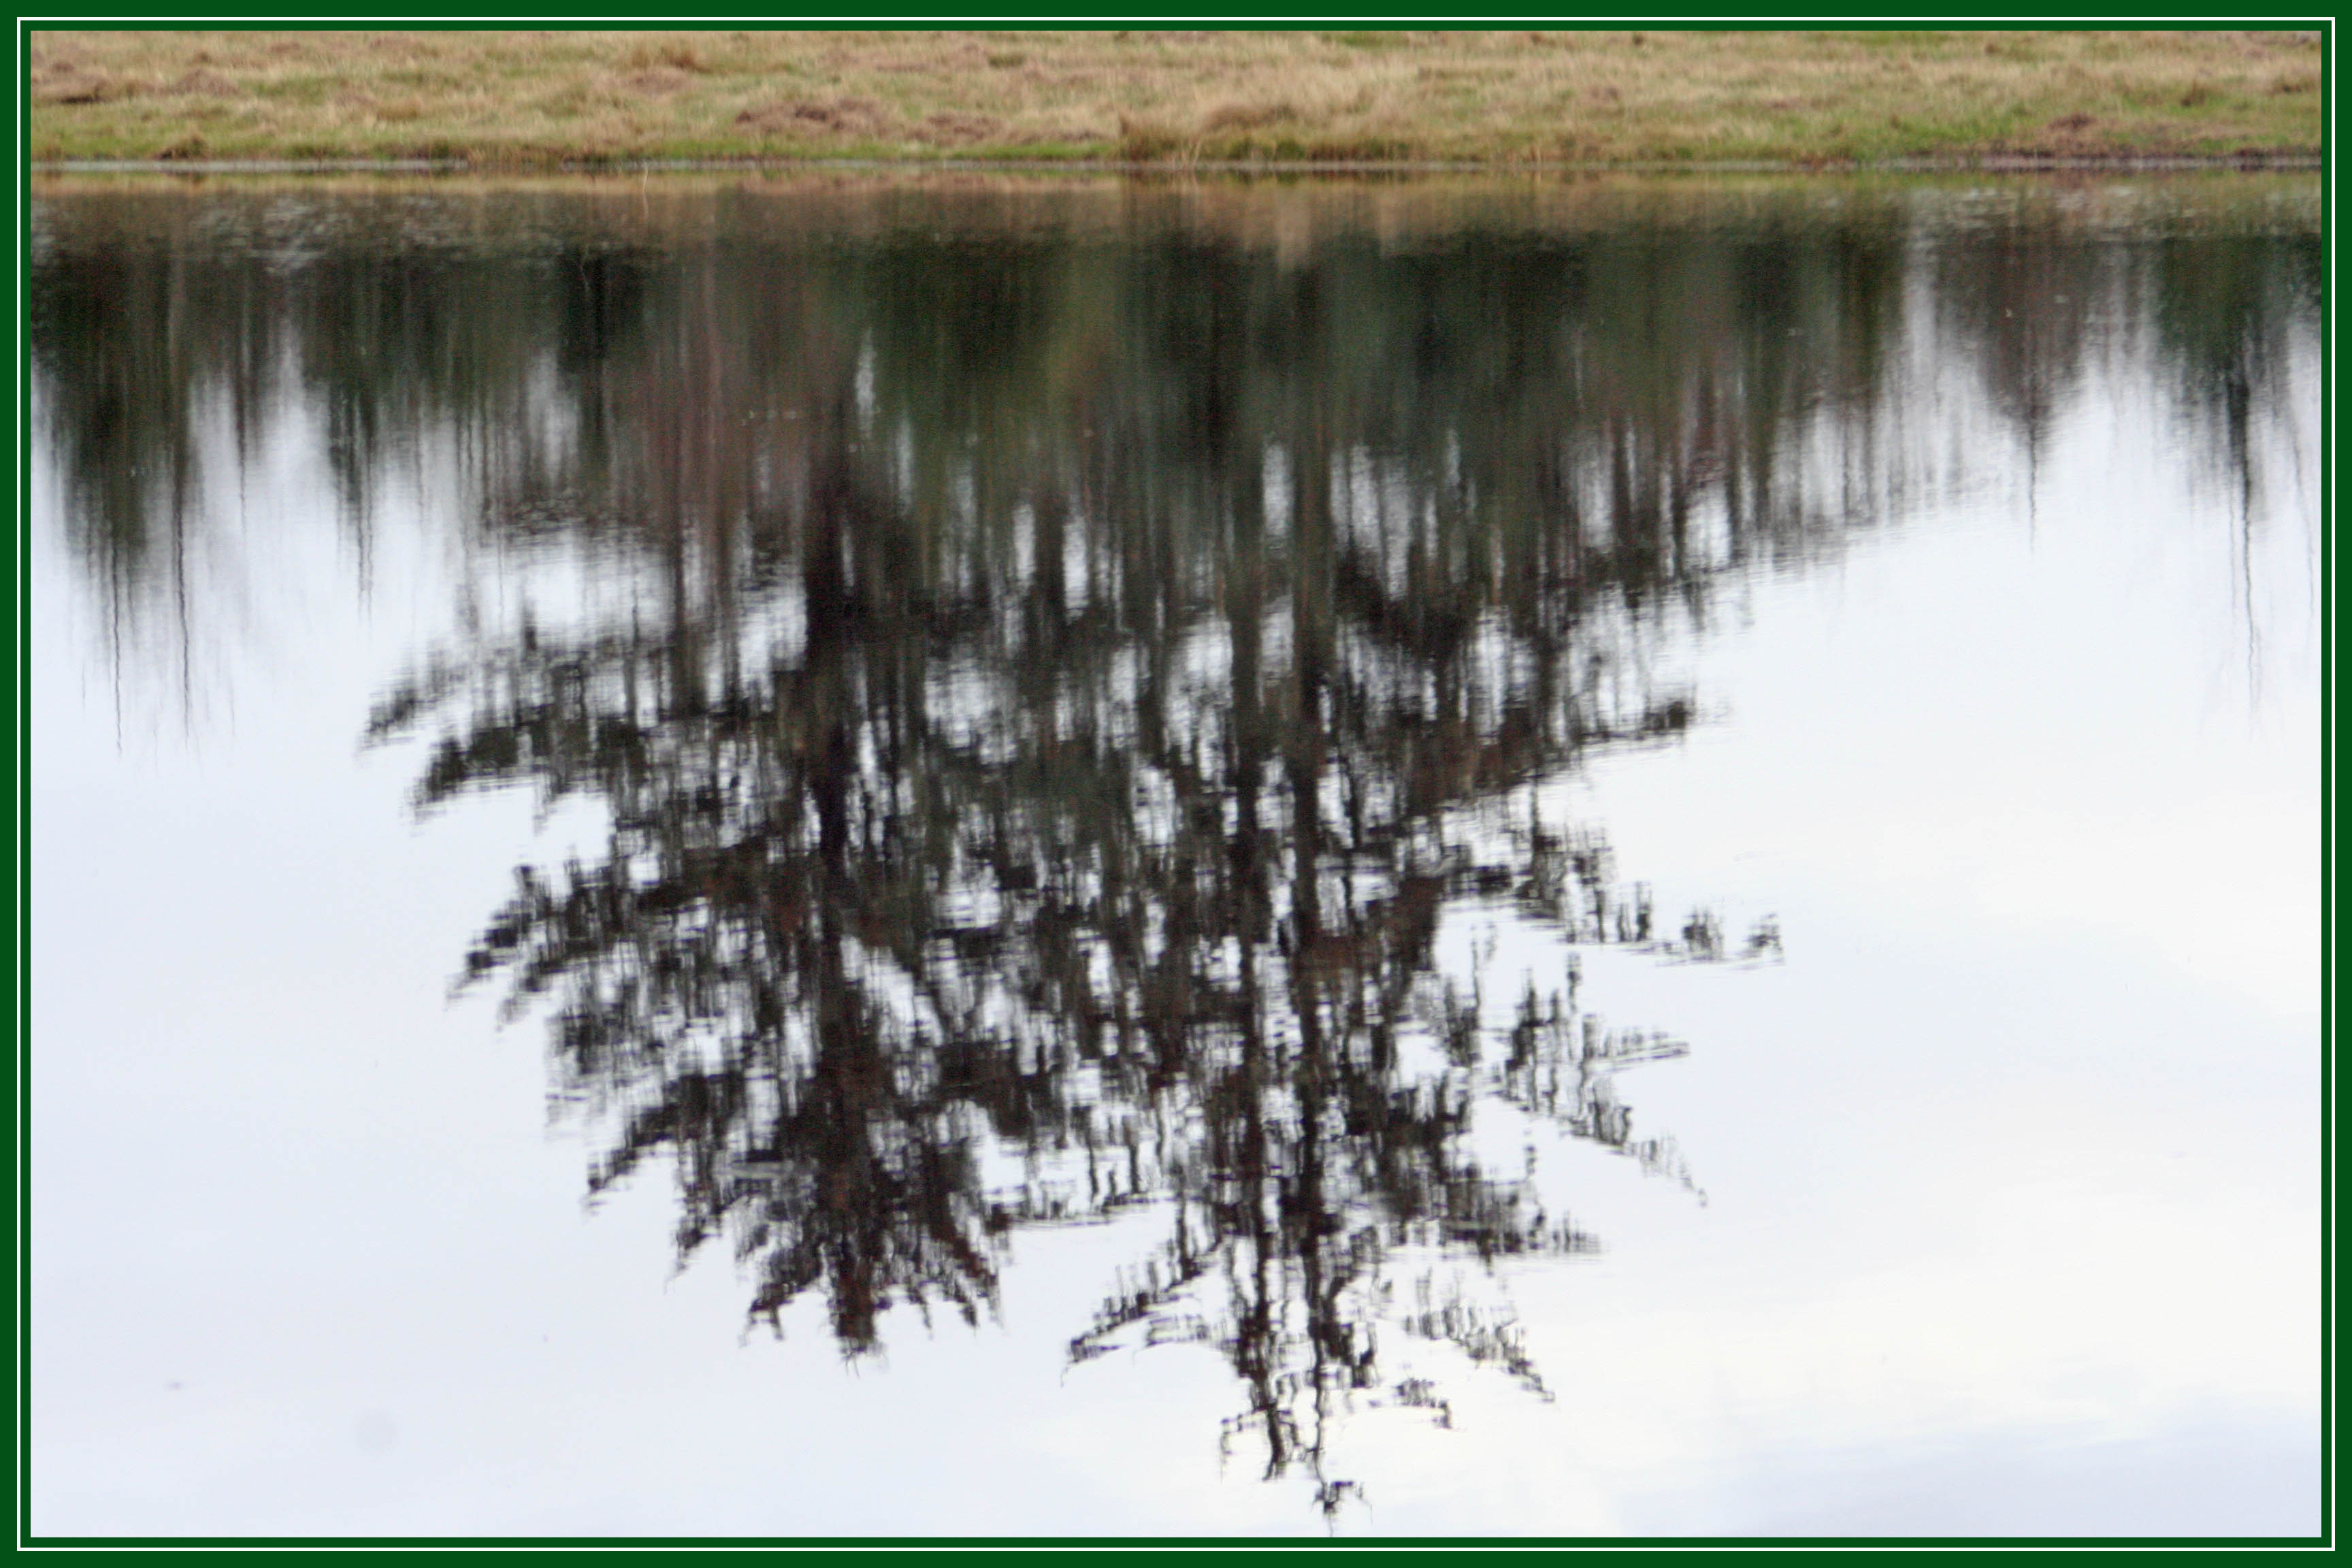 Playing with Pond Reflection